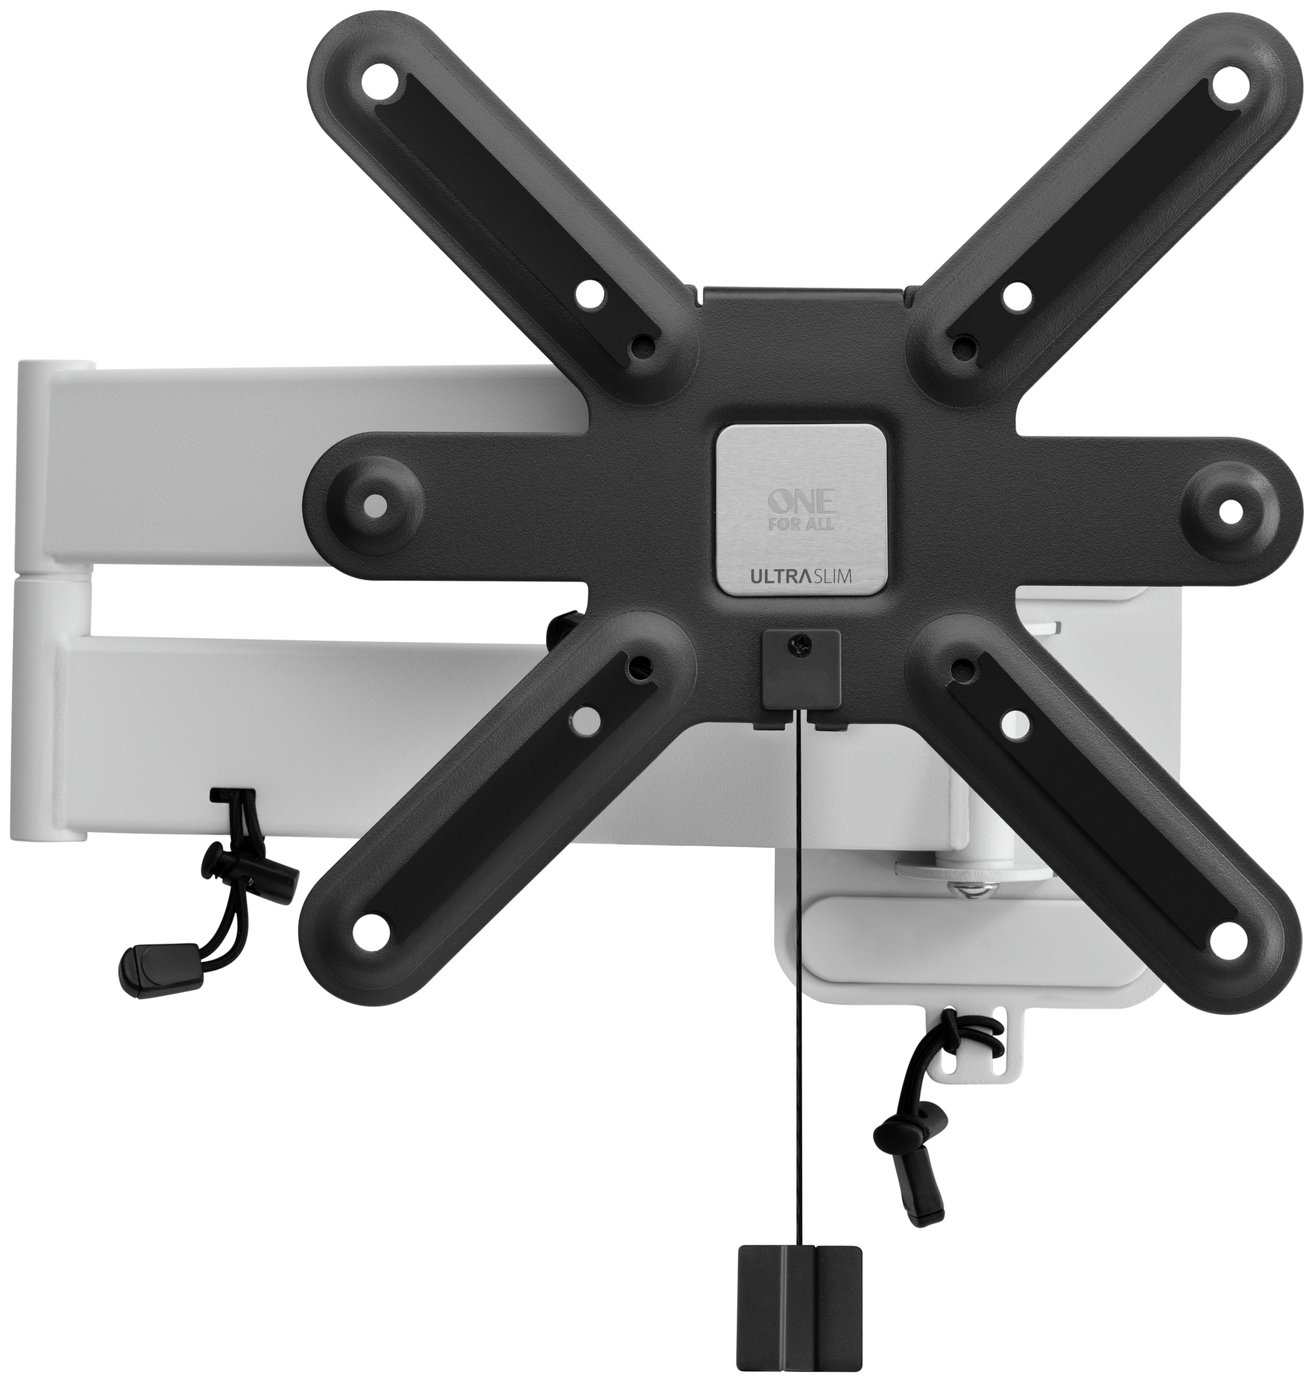 One For All WM6251 Tilt & Swivel Up To 42in TV Wall Bracket Review